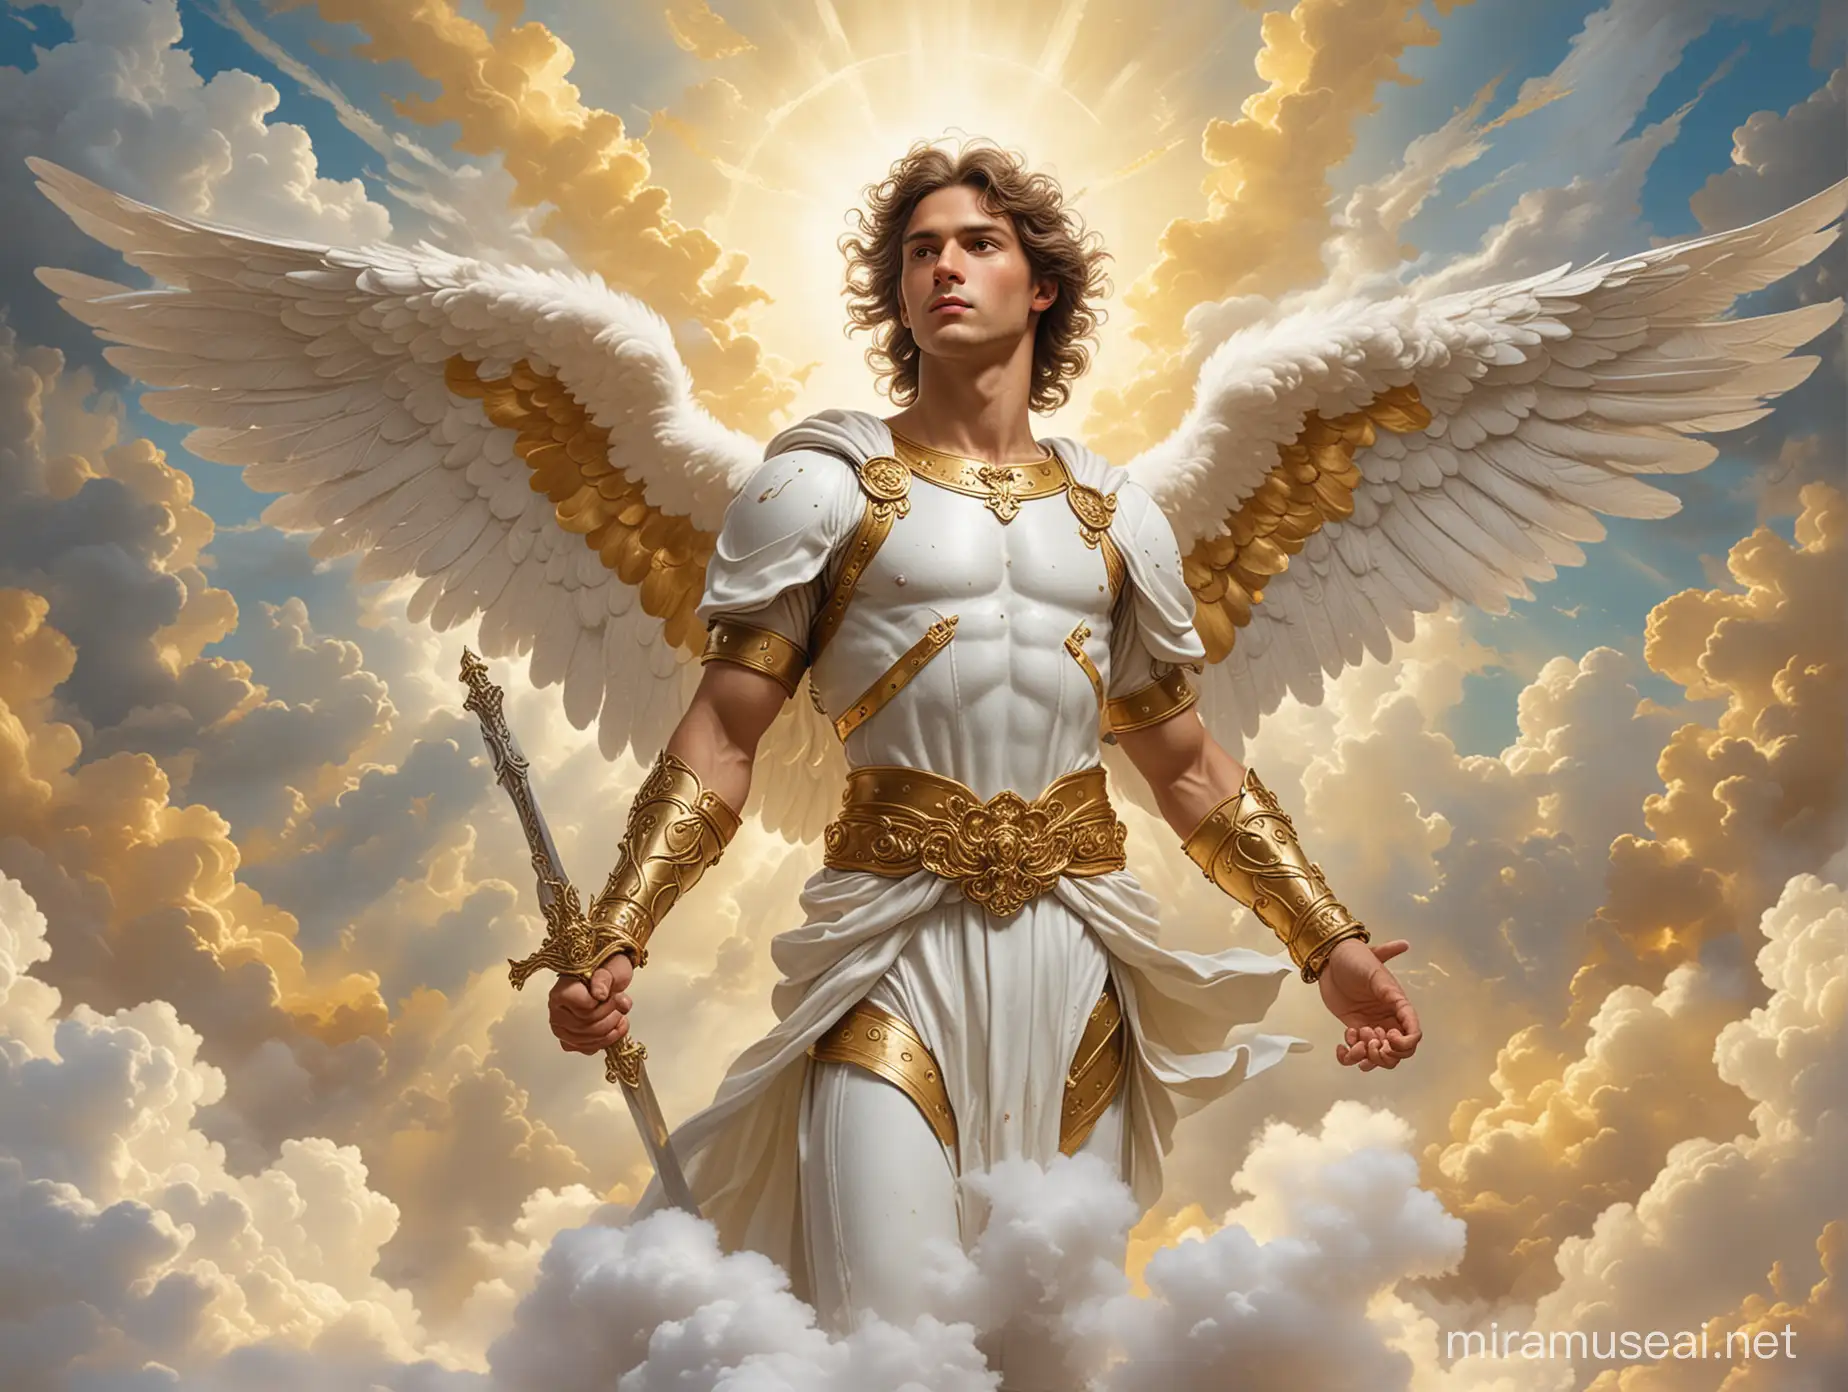 /imagine a realistic artistic rendering of Michael the Archangel with a with a white and gold puffy cloud background